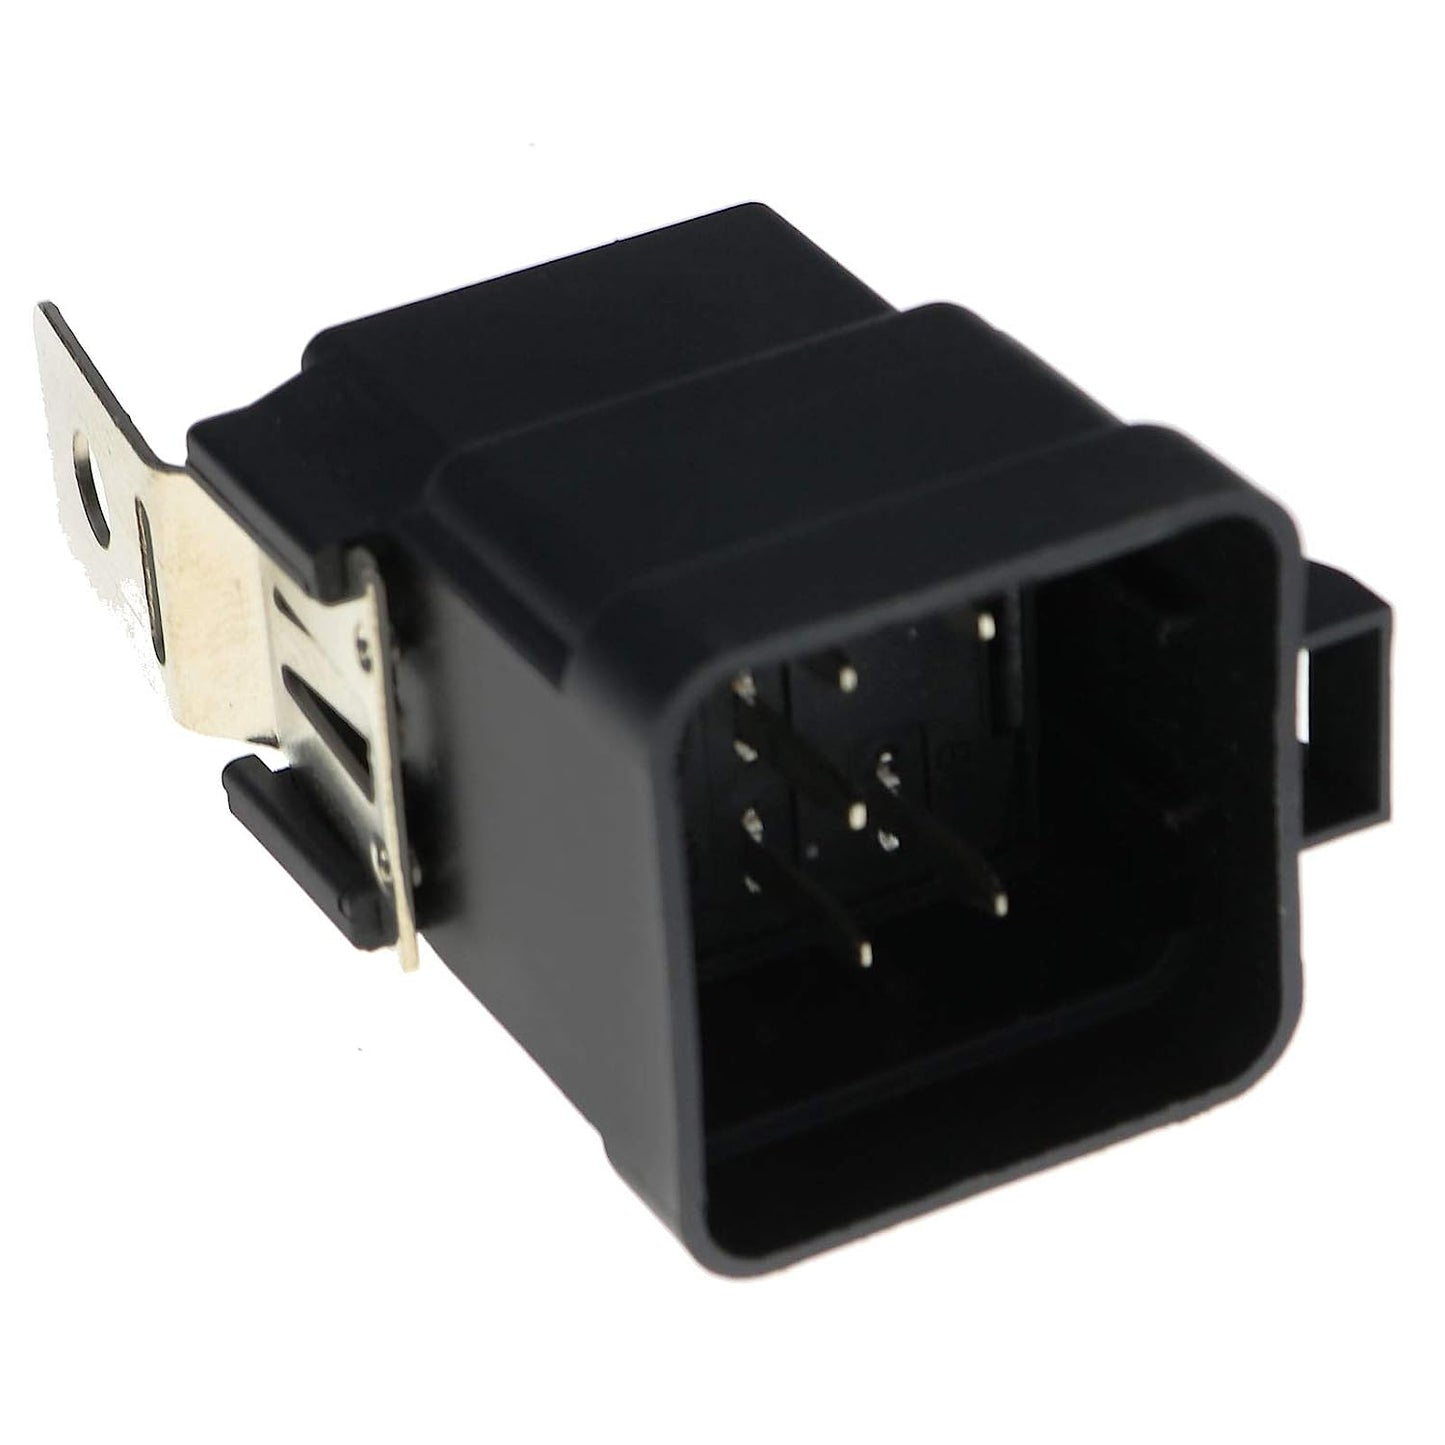 6670312 Relay Switch Compatible With Bobcat 731 732 741 742 743 751 753 763 Skid Steer Loader